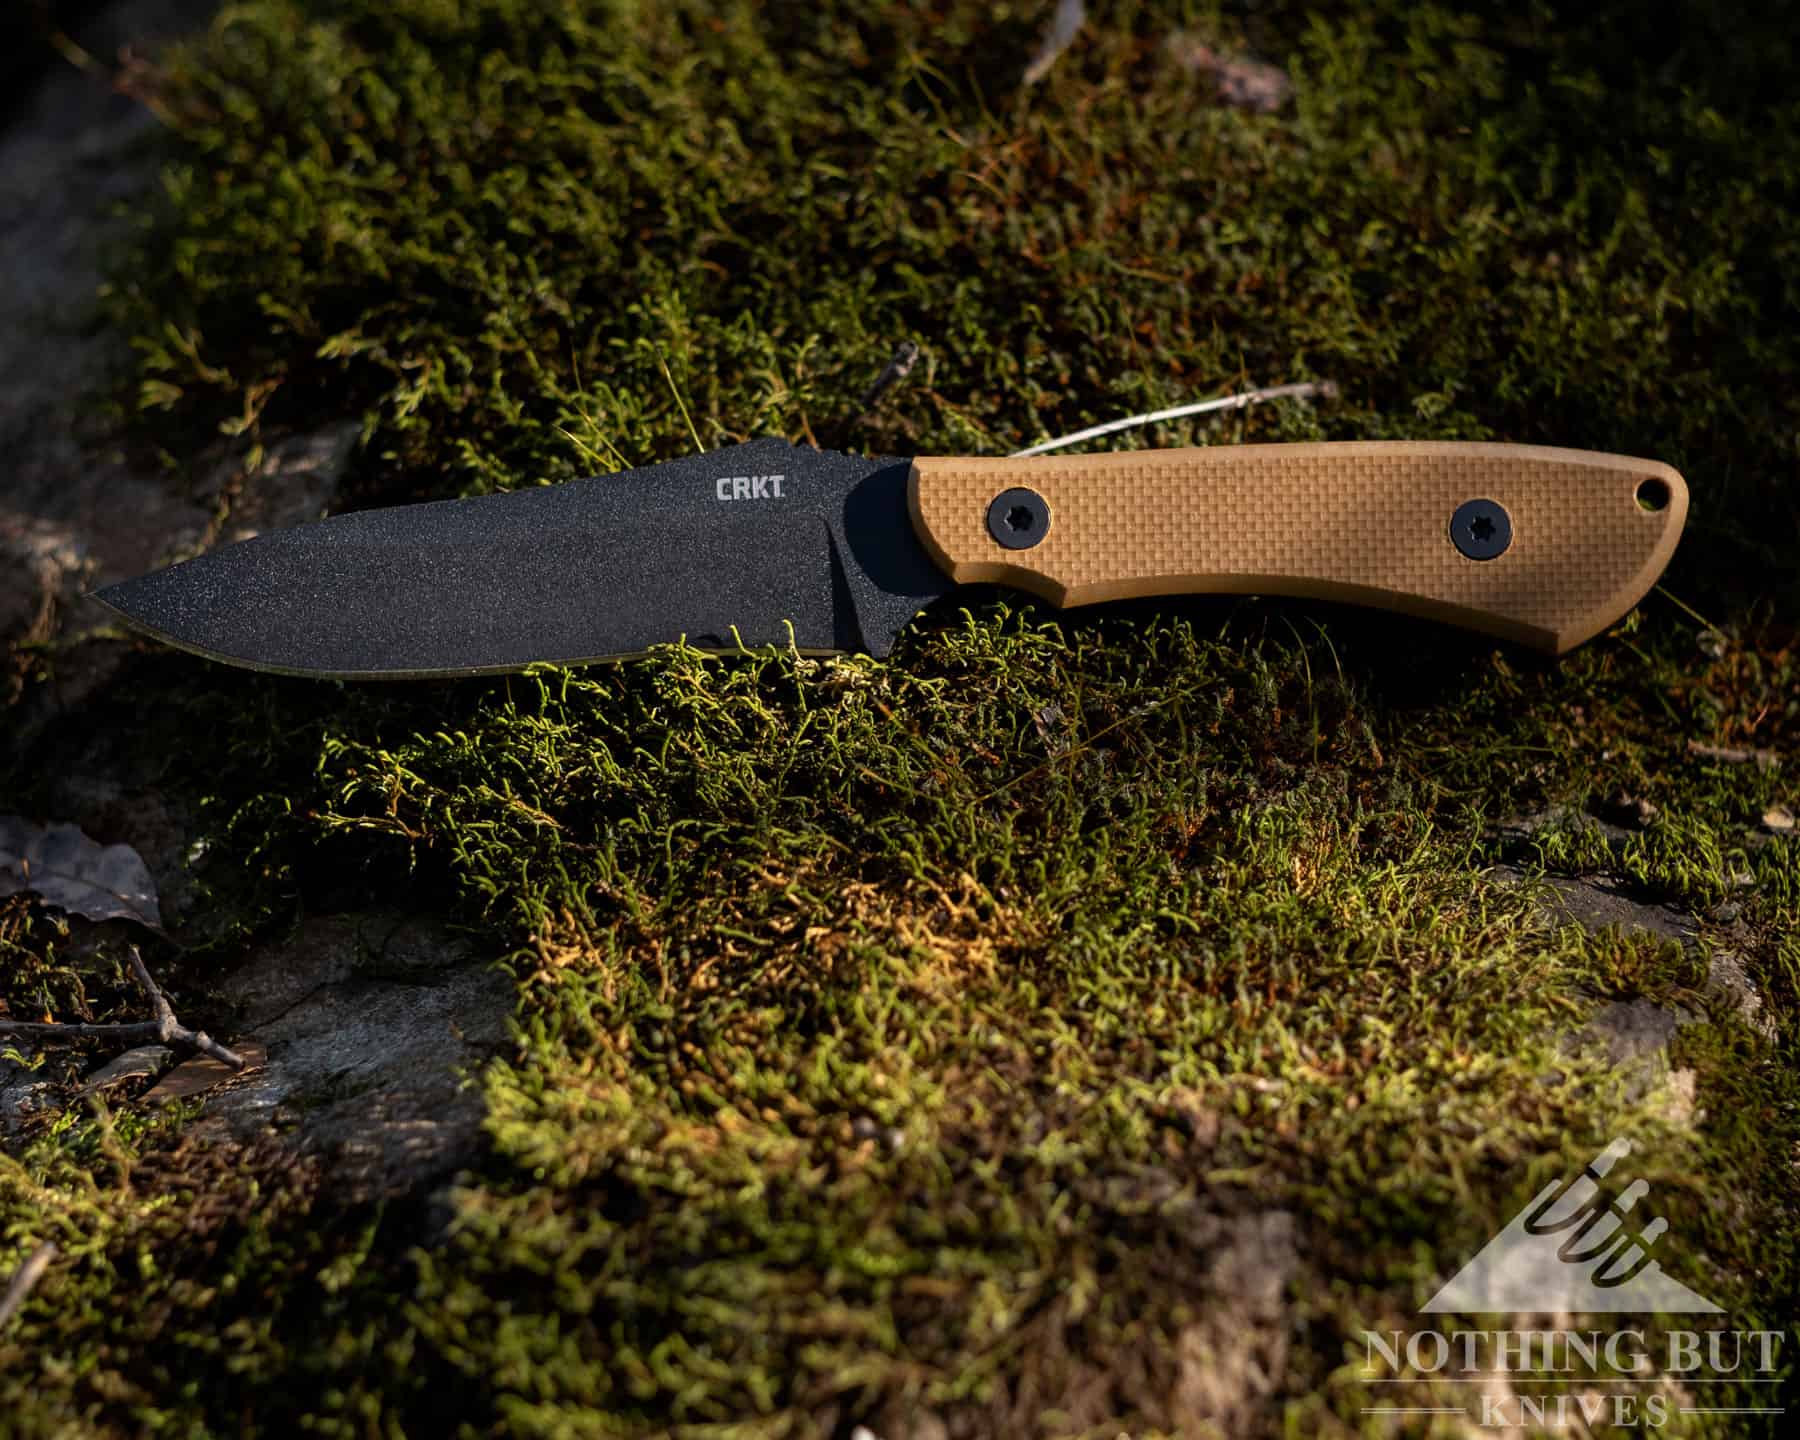 The Ramadis is a great knife that does what it was made to do plus a little more.